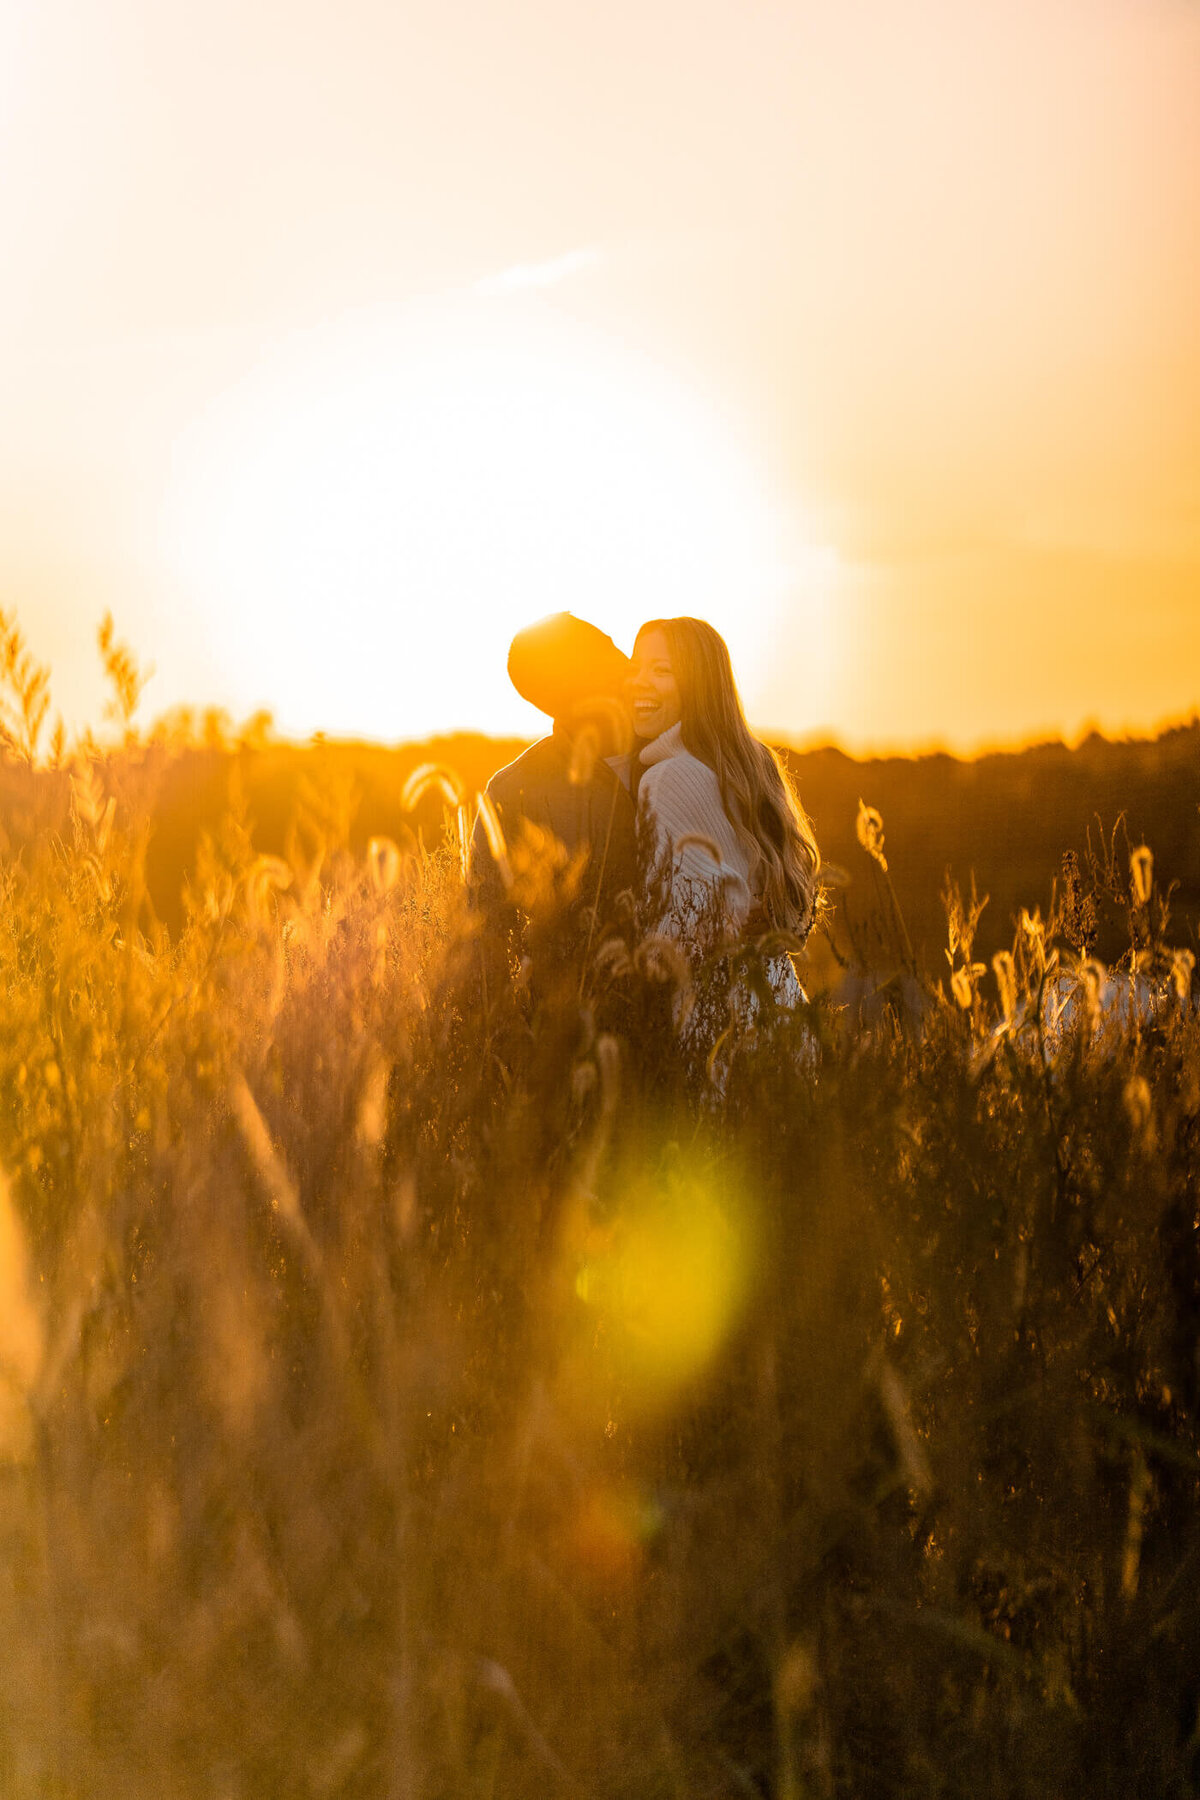 Pittsburgh Engagement photo of a man kissing his fiance on the cheek during a golden sunset in beaver, PA